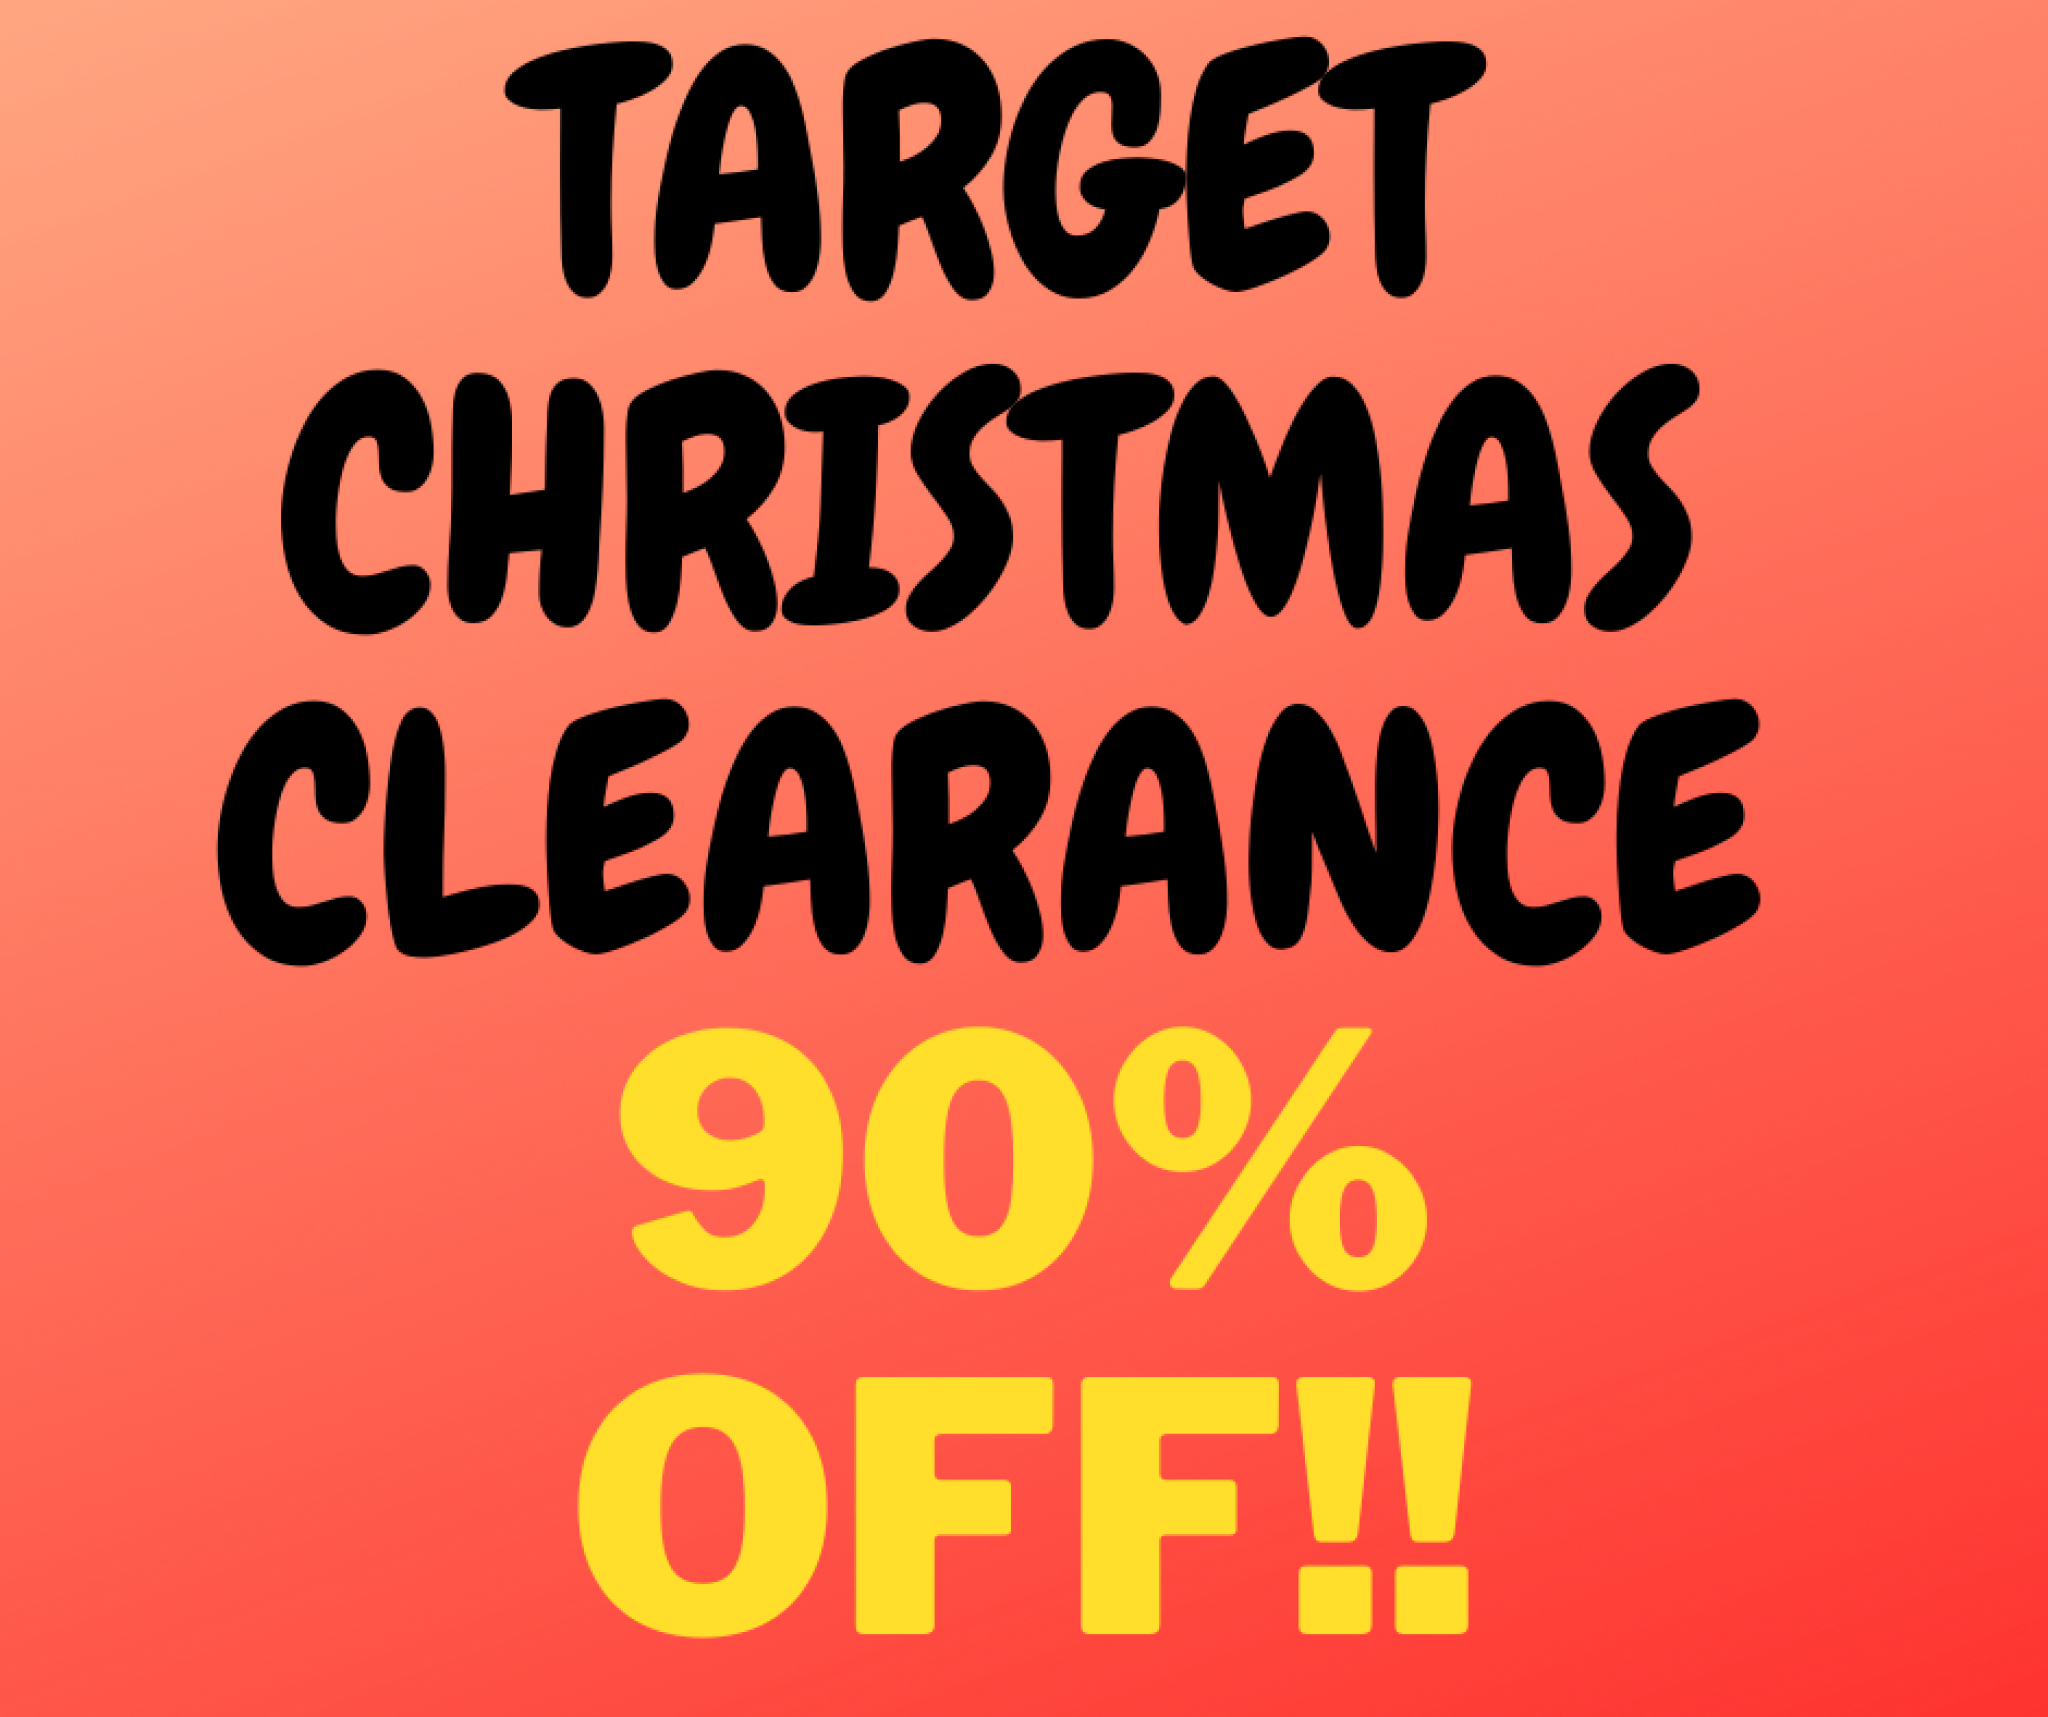 Target Christmas Clearance 90 OFF! Glitchndealz